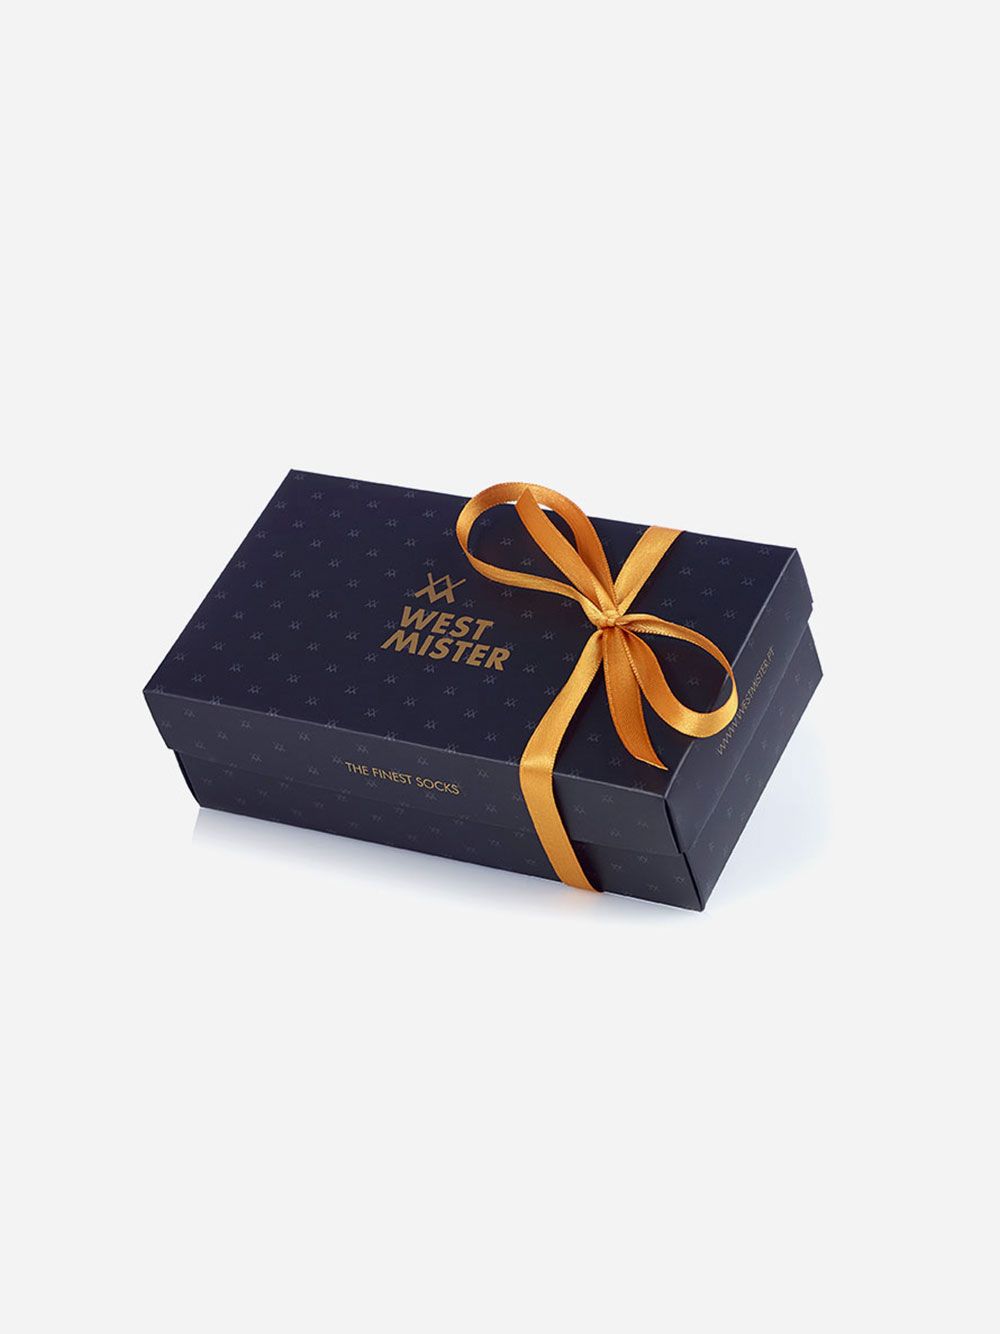 Camouflage Gift Box | Westmister